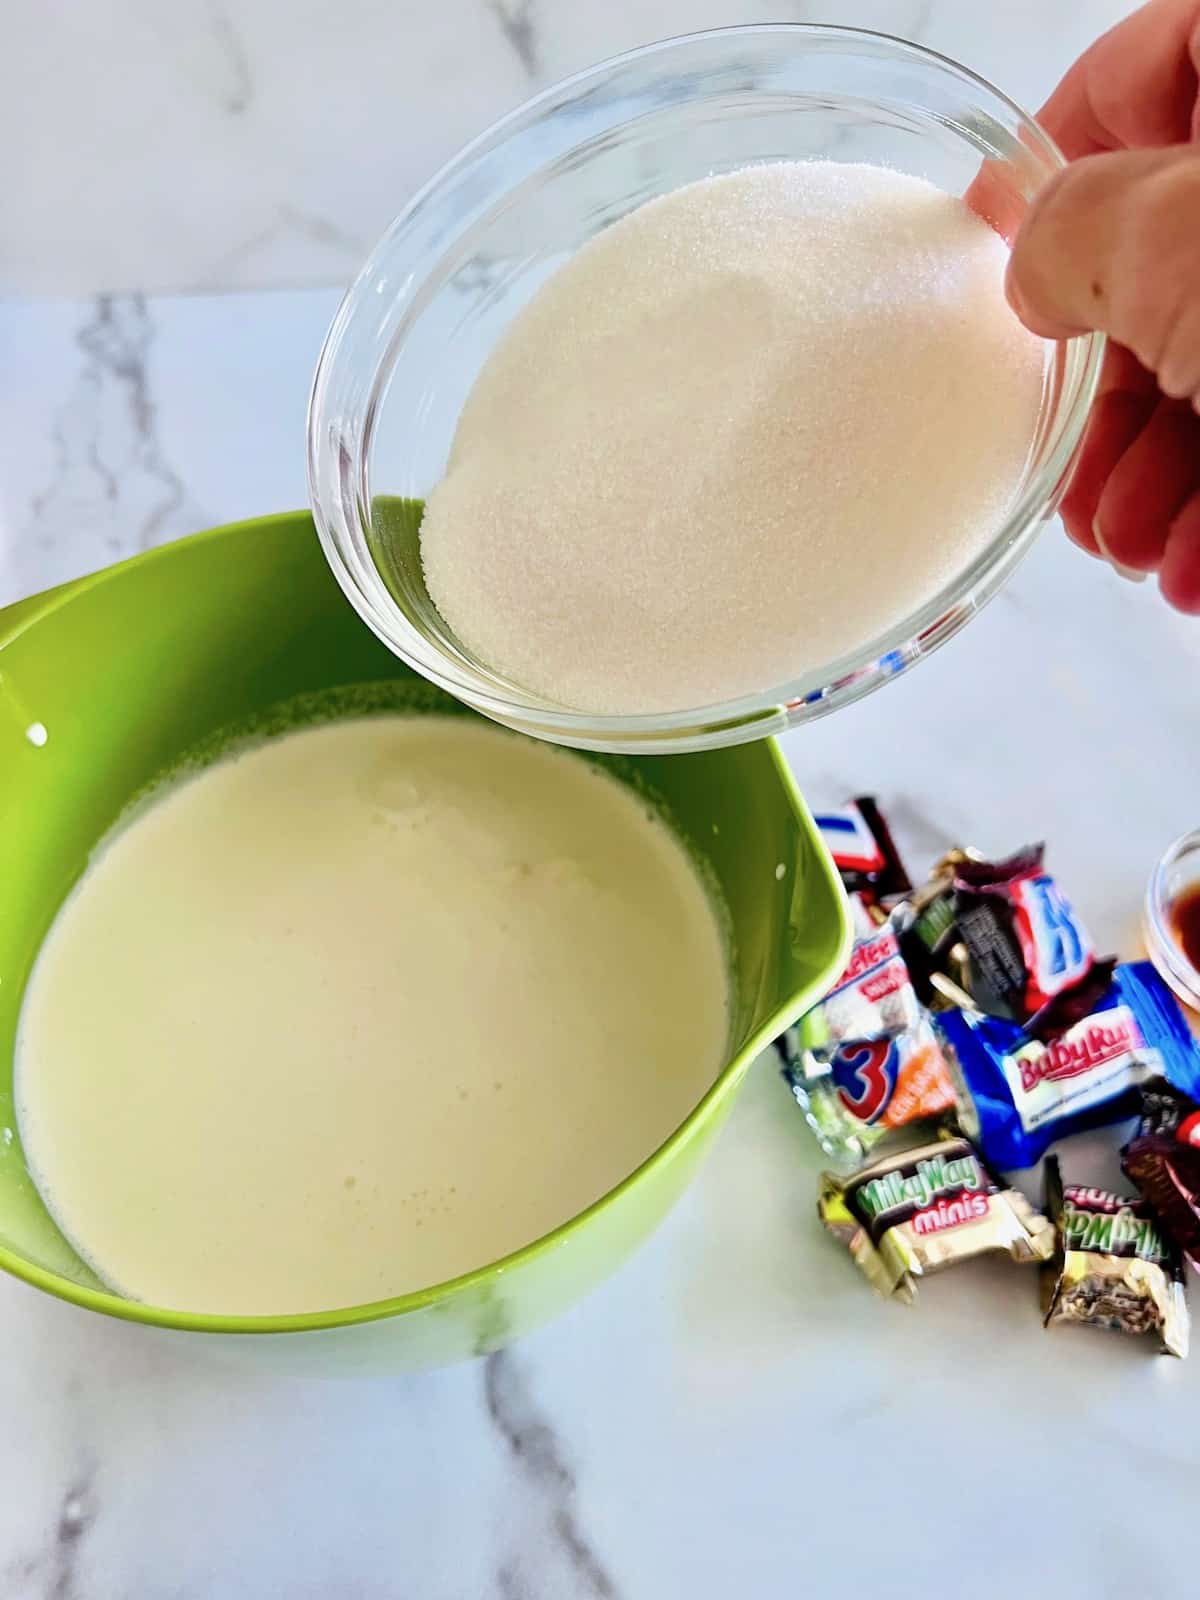 Adding sugar to the cream and milk in a mixing bowl.